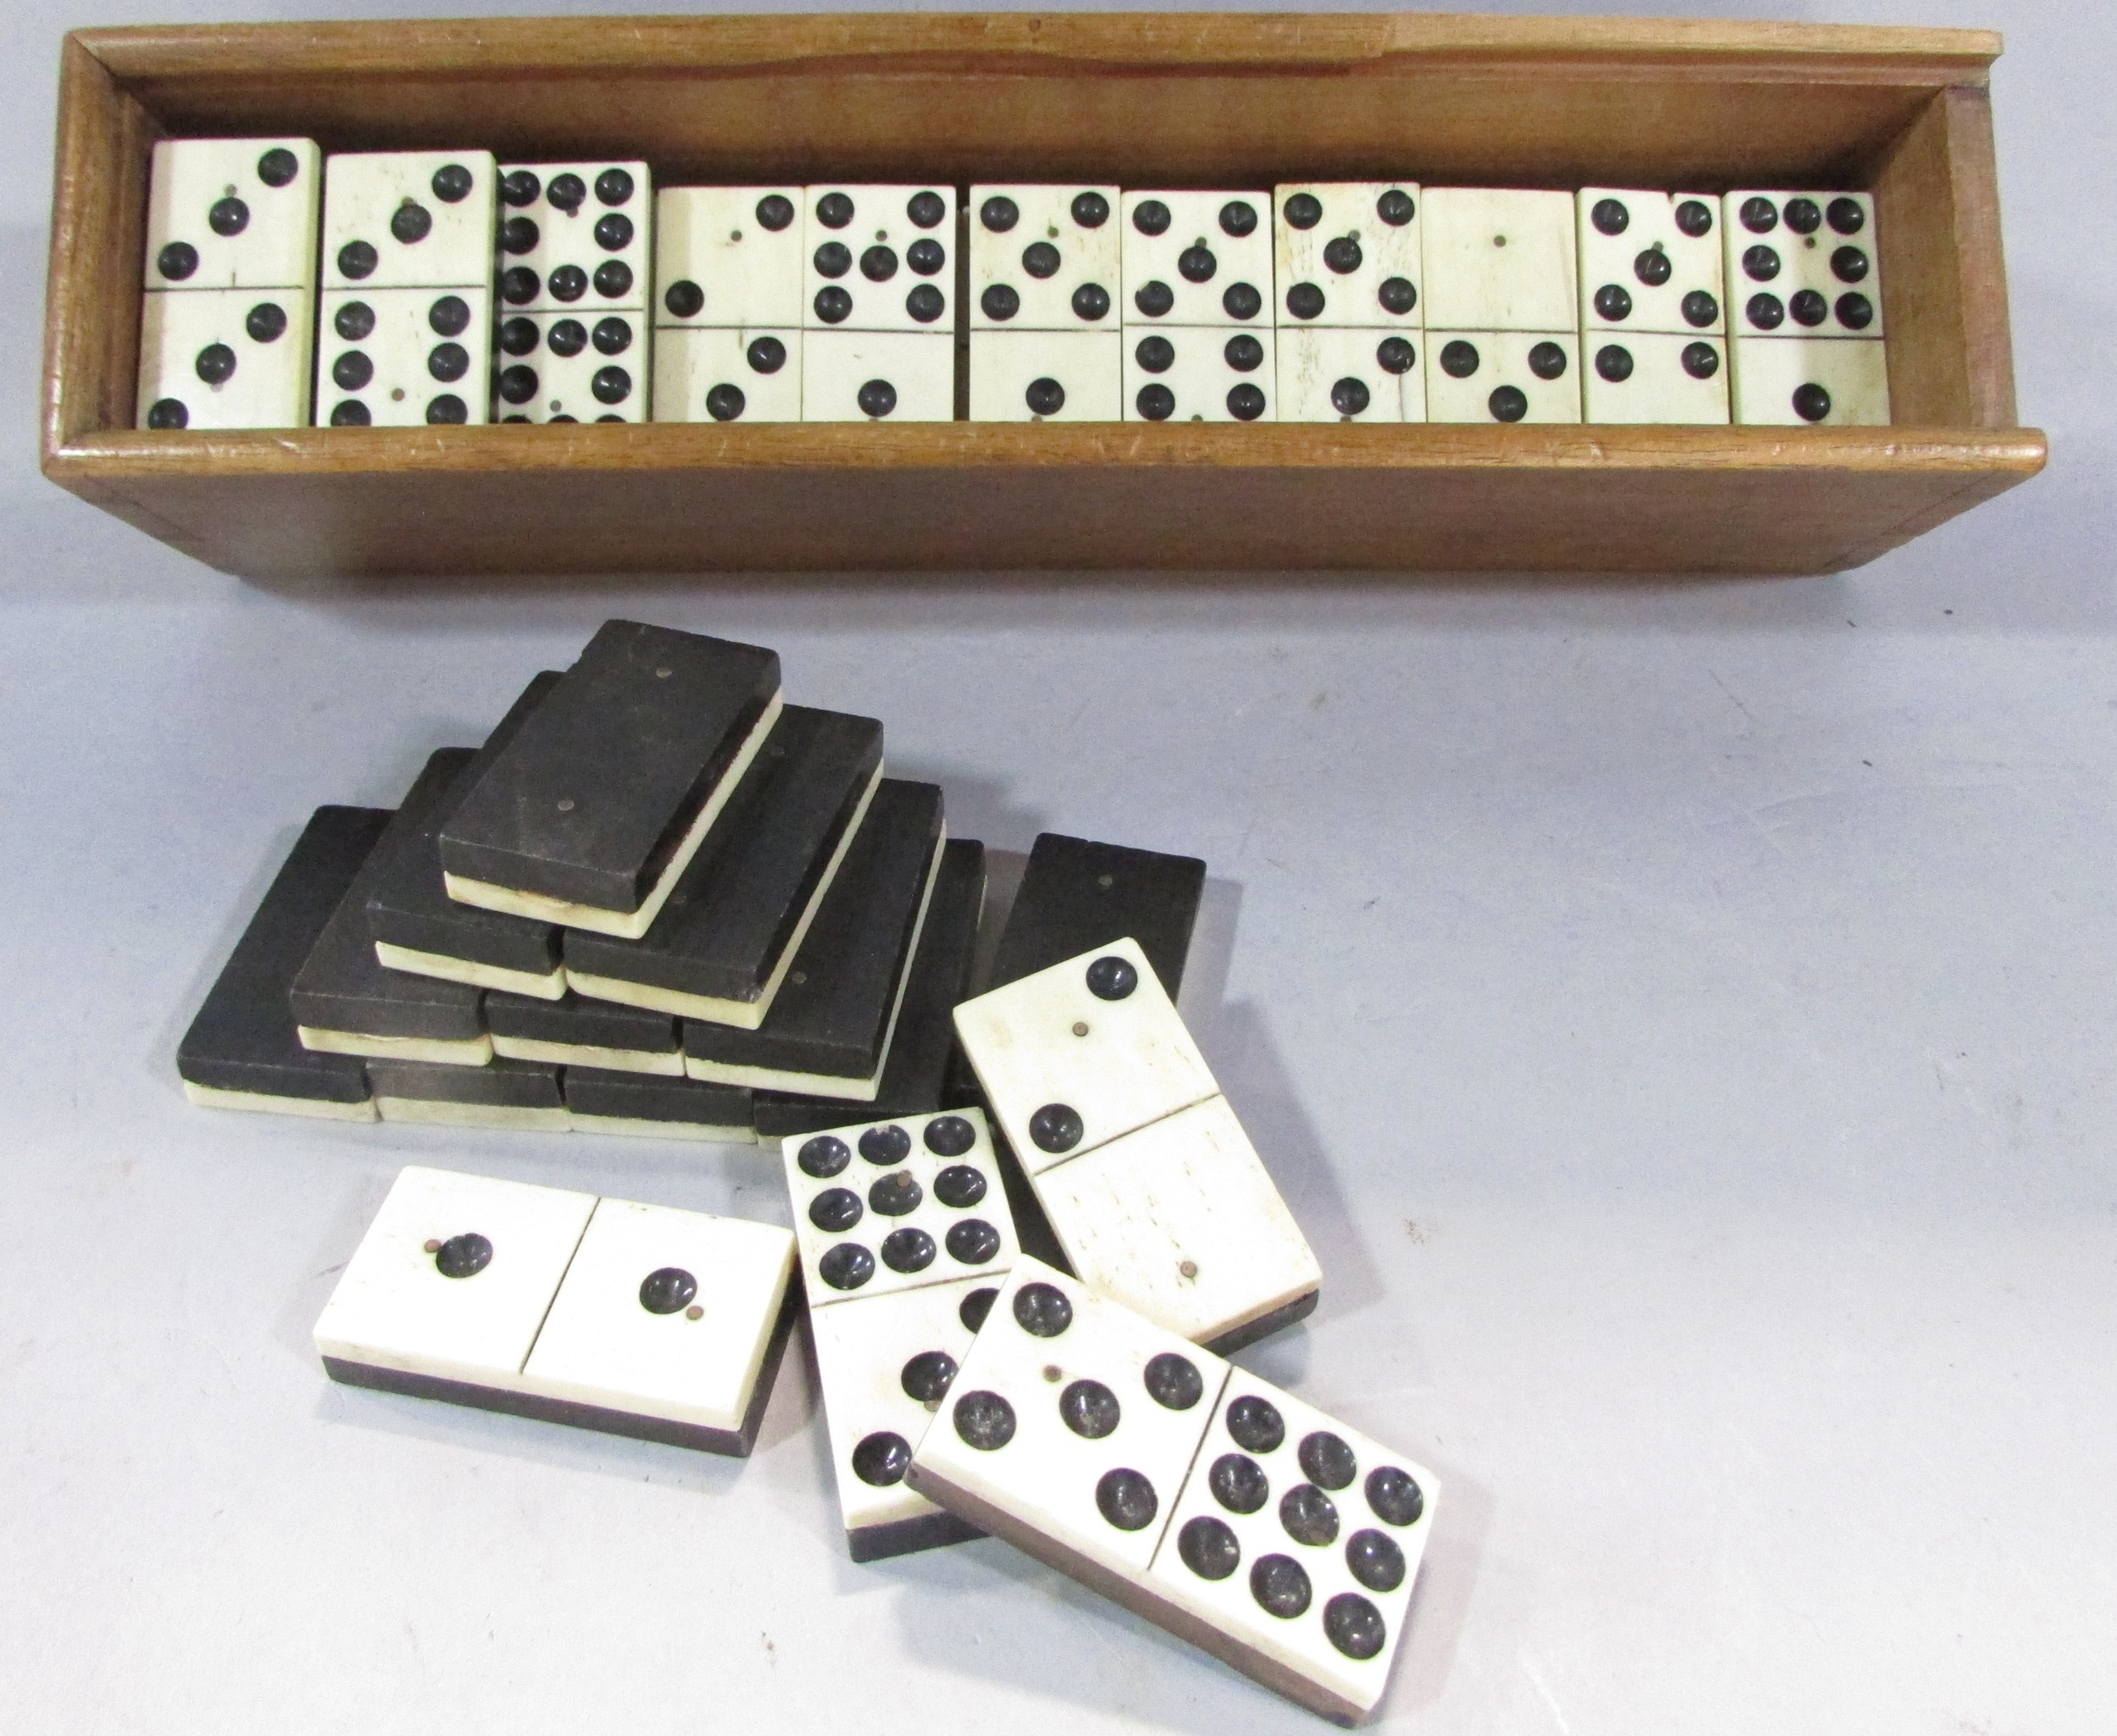 An Antique Nine Dot Domino set in a wooden case, only 53 tiles, a set of wooden draughts counters, - Image 3 of 4